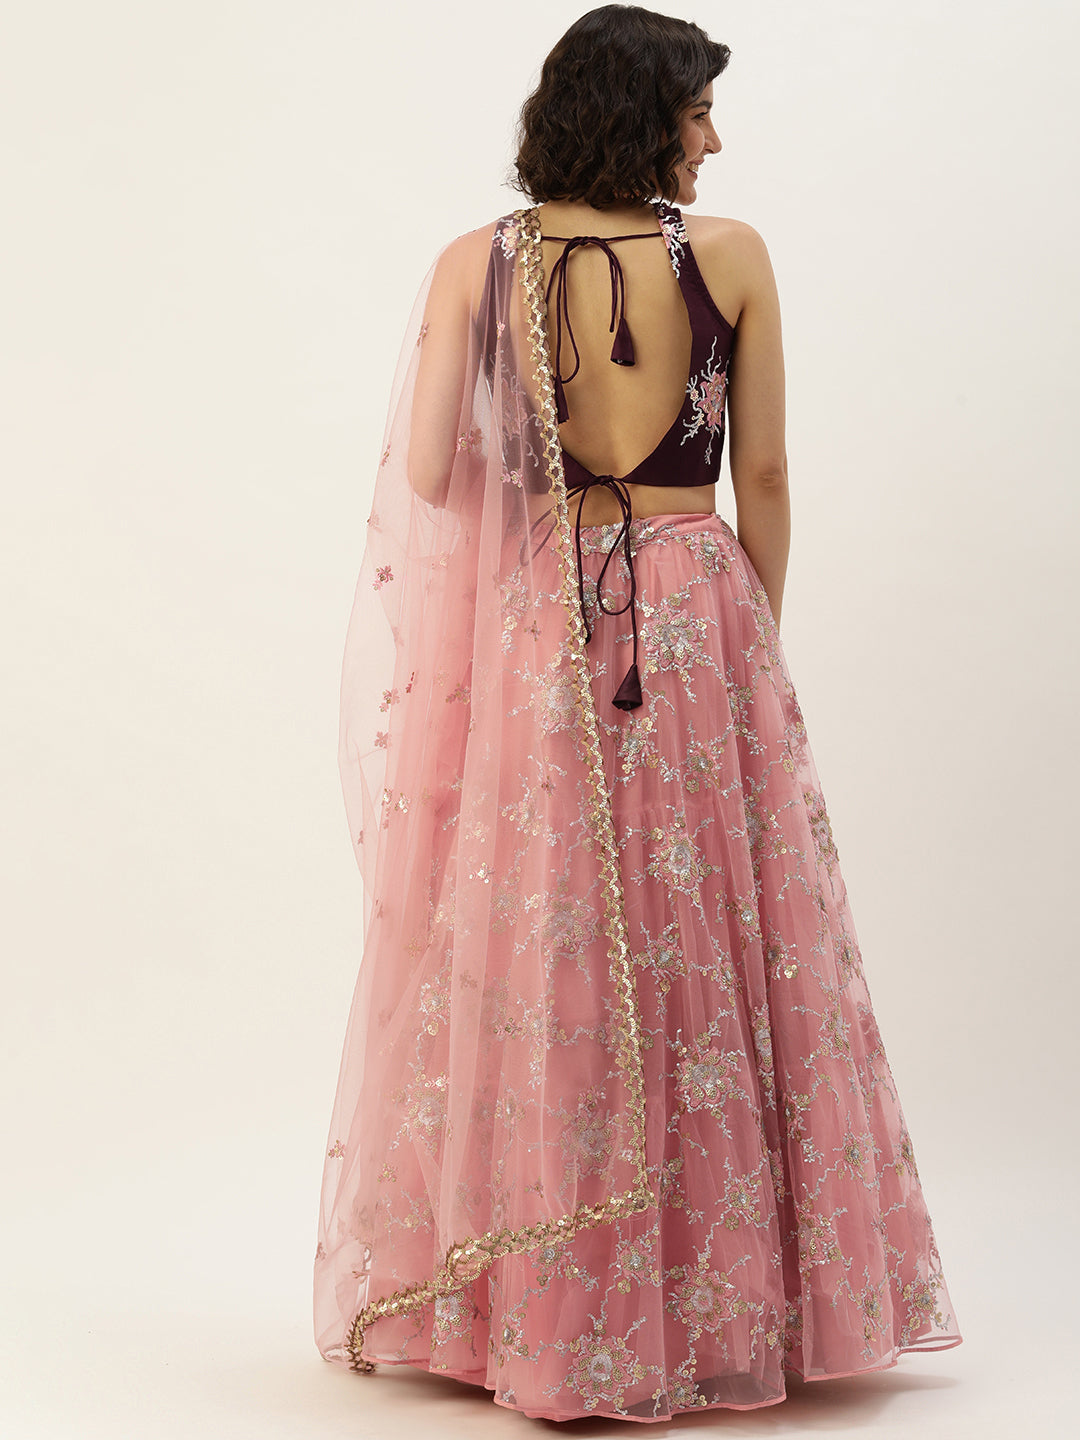 Women's Pink Net Sequince Embroideried Lehenga  Blouse With Dupatta - Royal Dwells